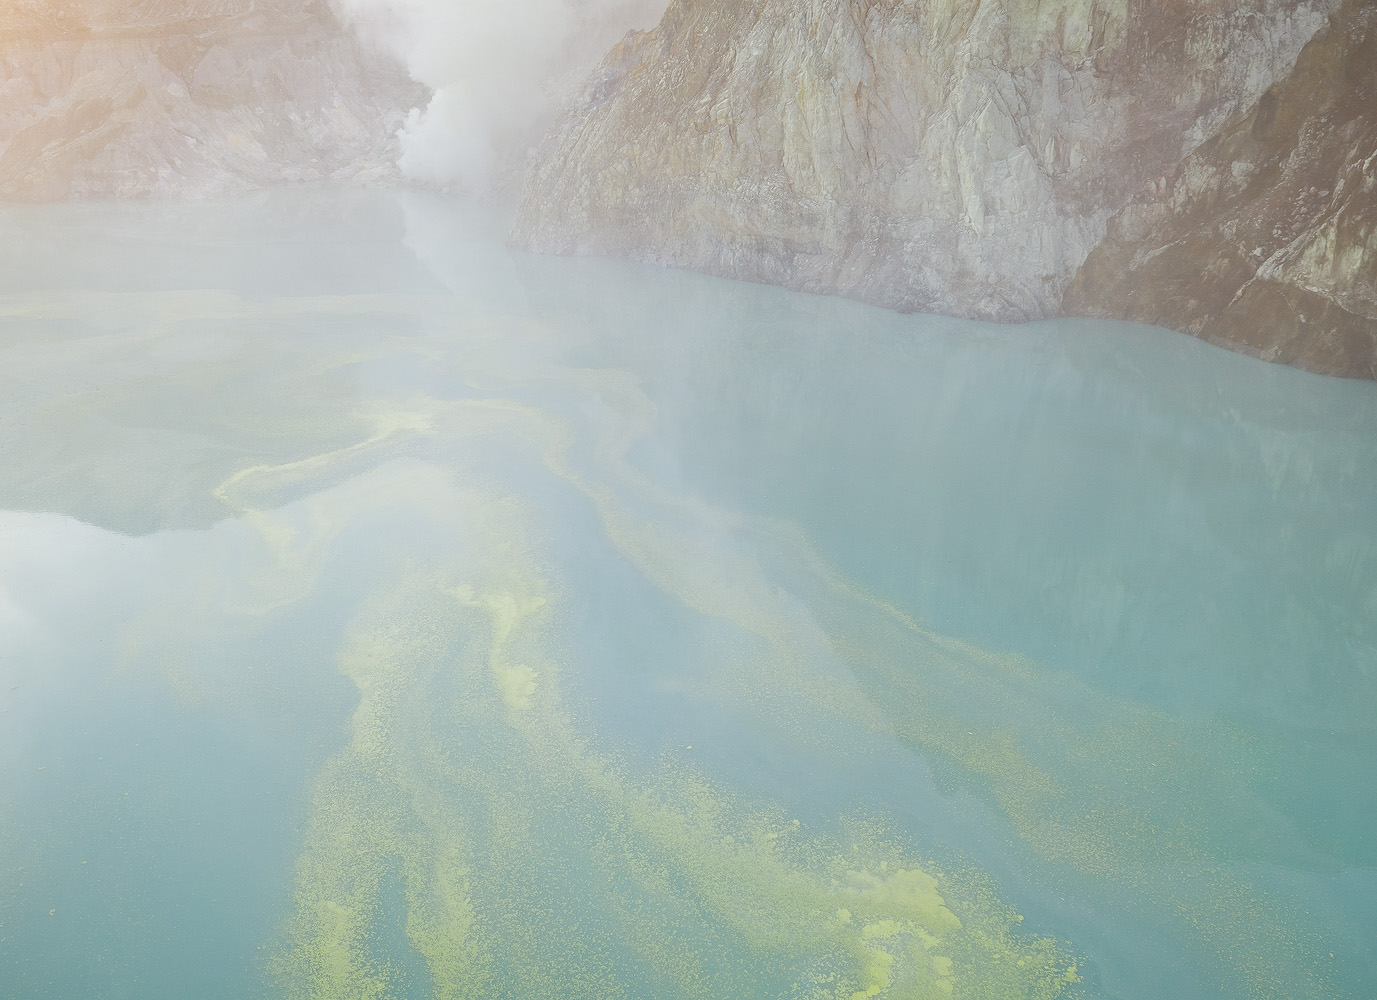 This shot is hazy because it's taken from within a caldera filled with toxic gasses. </br>DJI Mavic II Pro, 1/25 sec, F6.3, ISO 100. Kawah Ijen, East Java, Indonesia